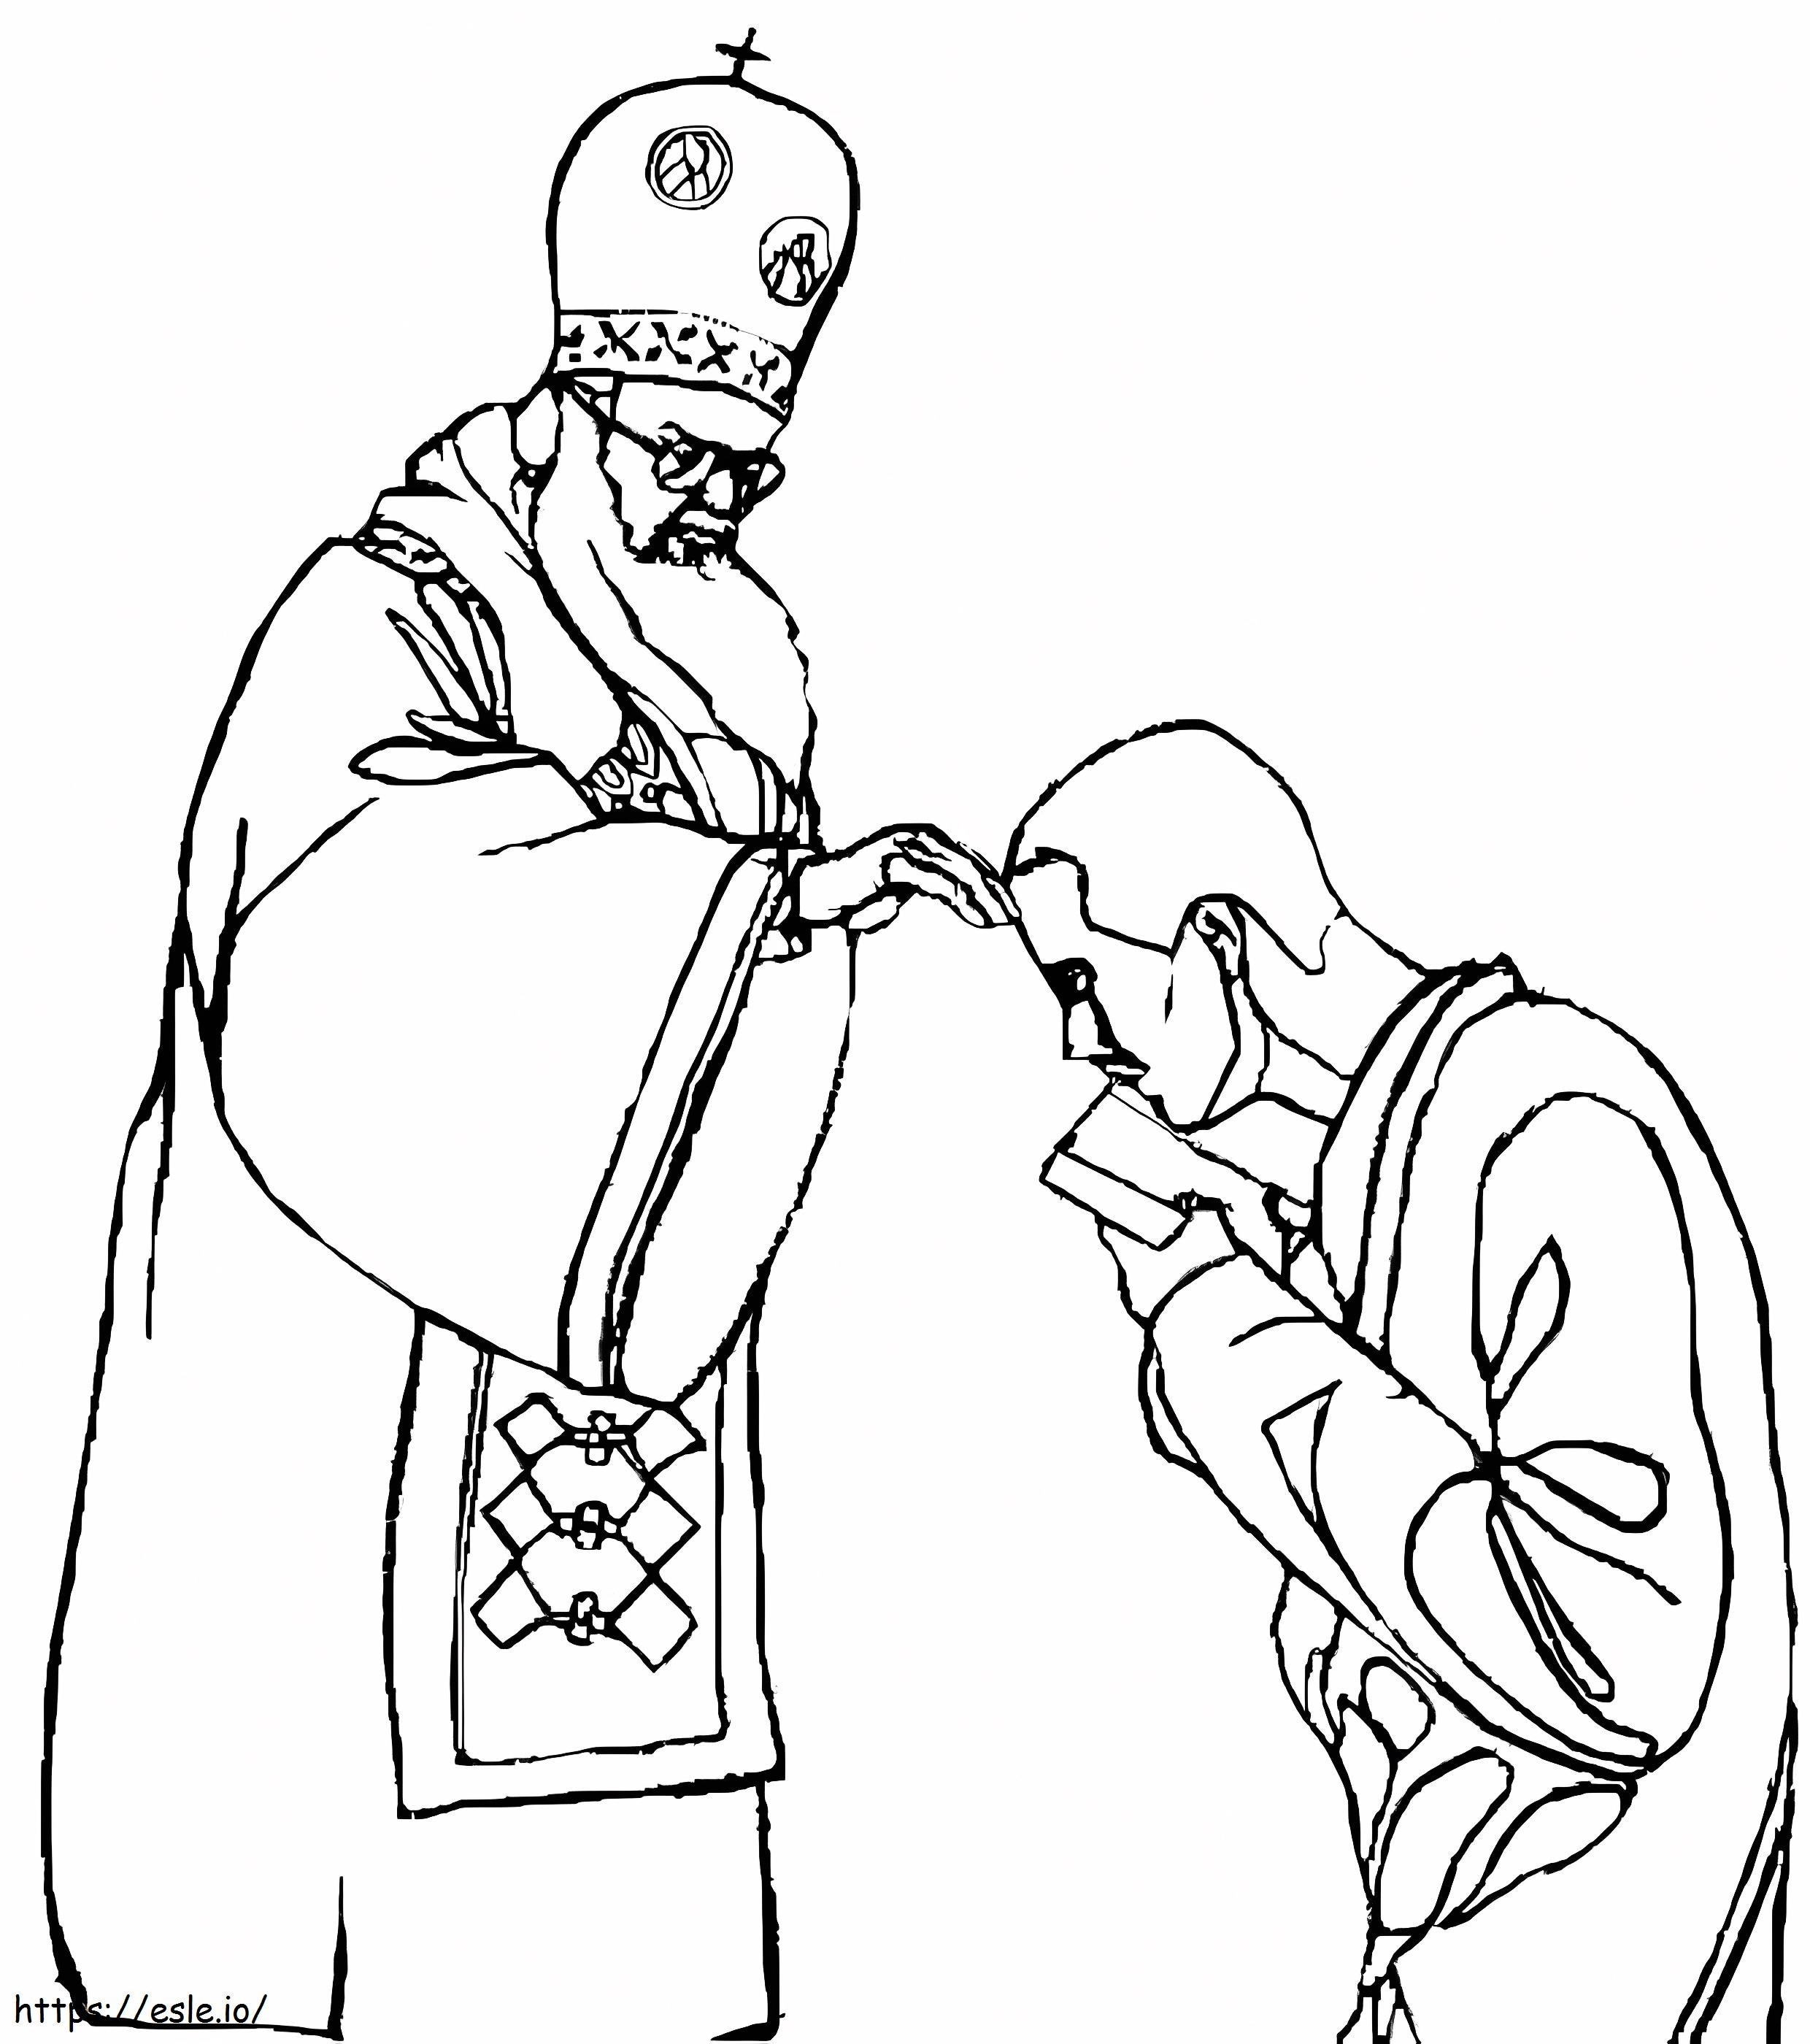 Ash Wednesday 5 coloring page